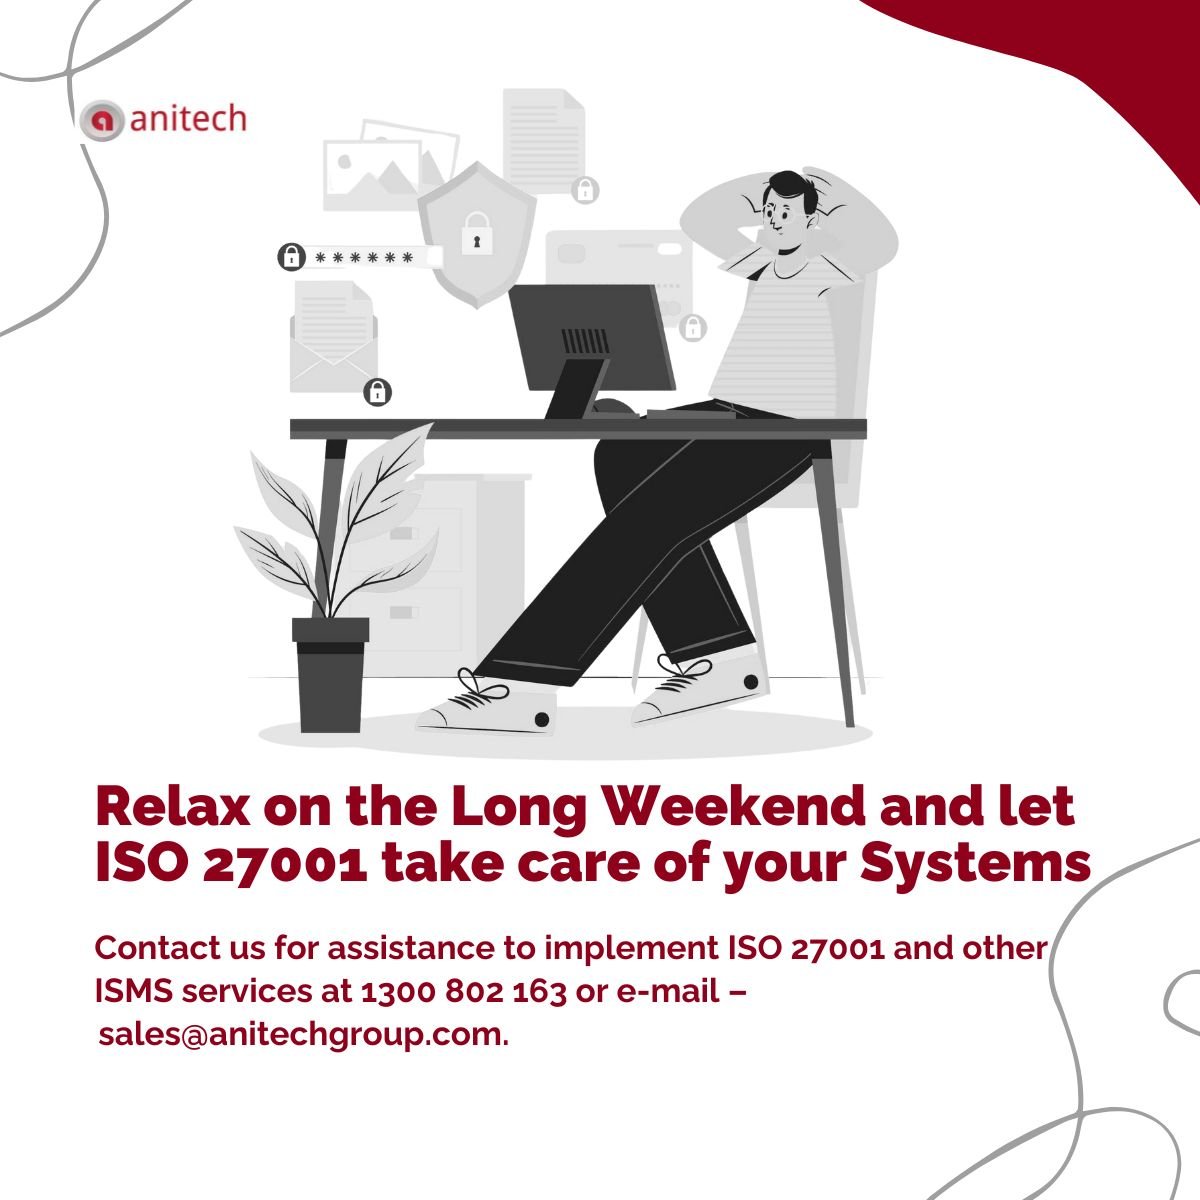 Relax on #longweekend & let ISO 27001 take care of your systems & keep #cybersecuriy #threats at bay!

Contact #Anitech for #ISO27001 & #ISMS services-1300 802 163 or e-mail – sales@anitechgroup.com

#systemsecurity #ISMSservices #ISO27001implementation #ISO27001certification